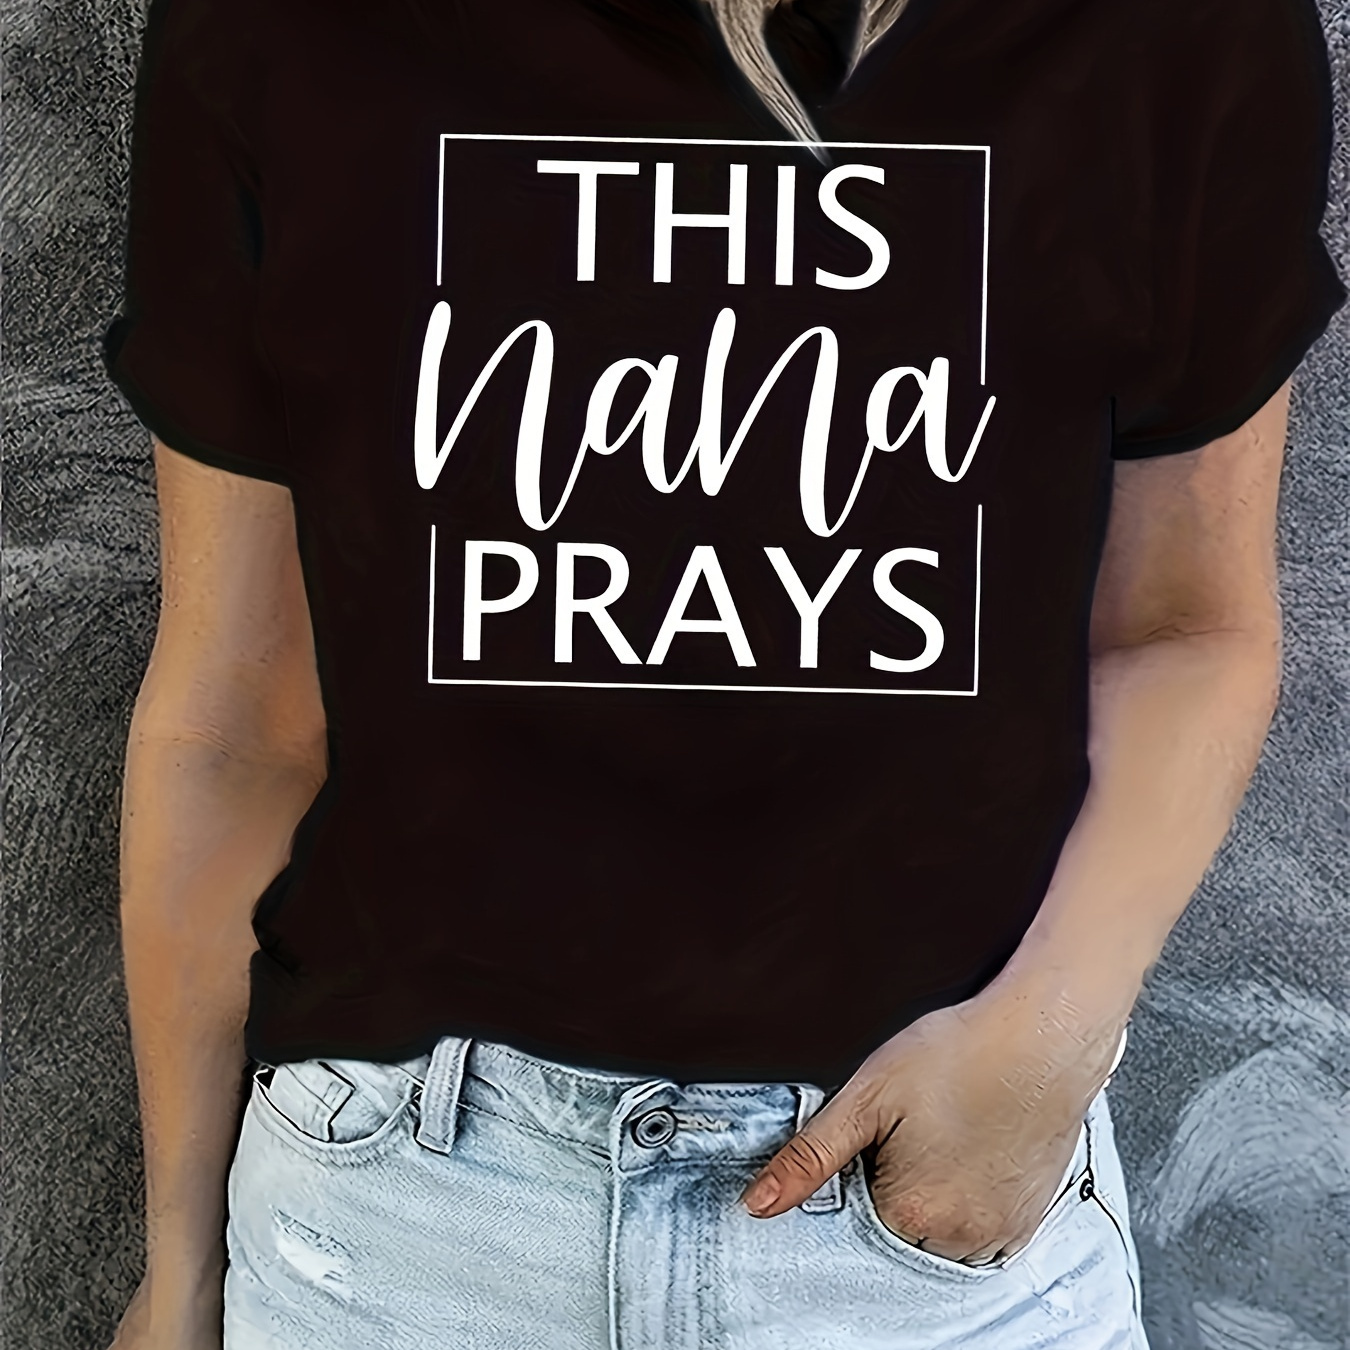 

This Nana Prays Print T-shirt, Casual Crew Neck Short Sleeve Top For Spring & Summer, Women's Clothing